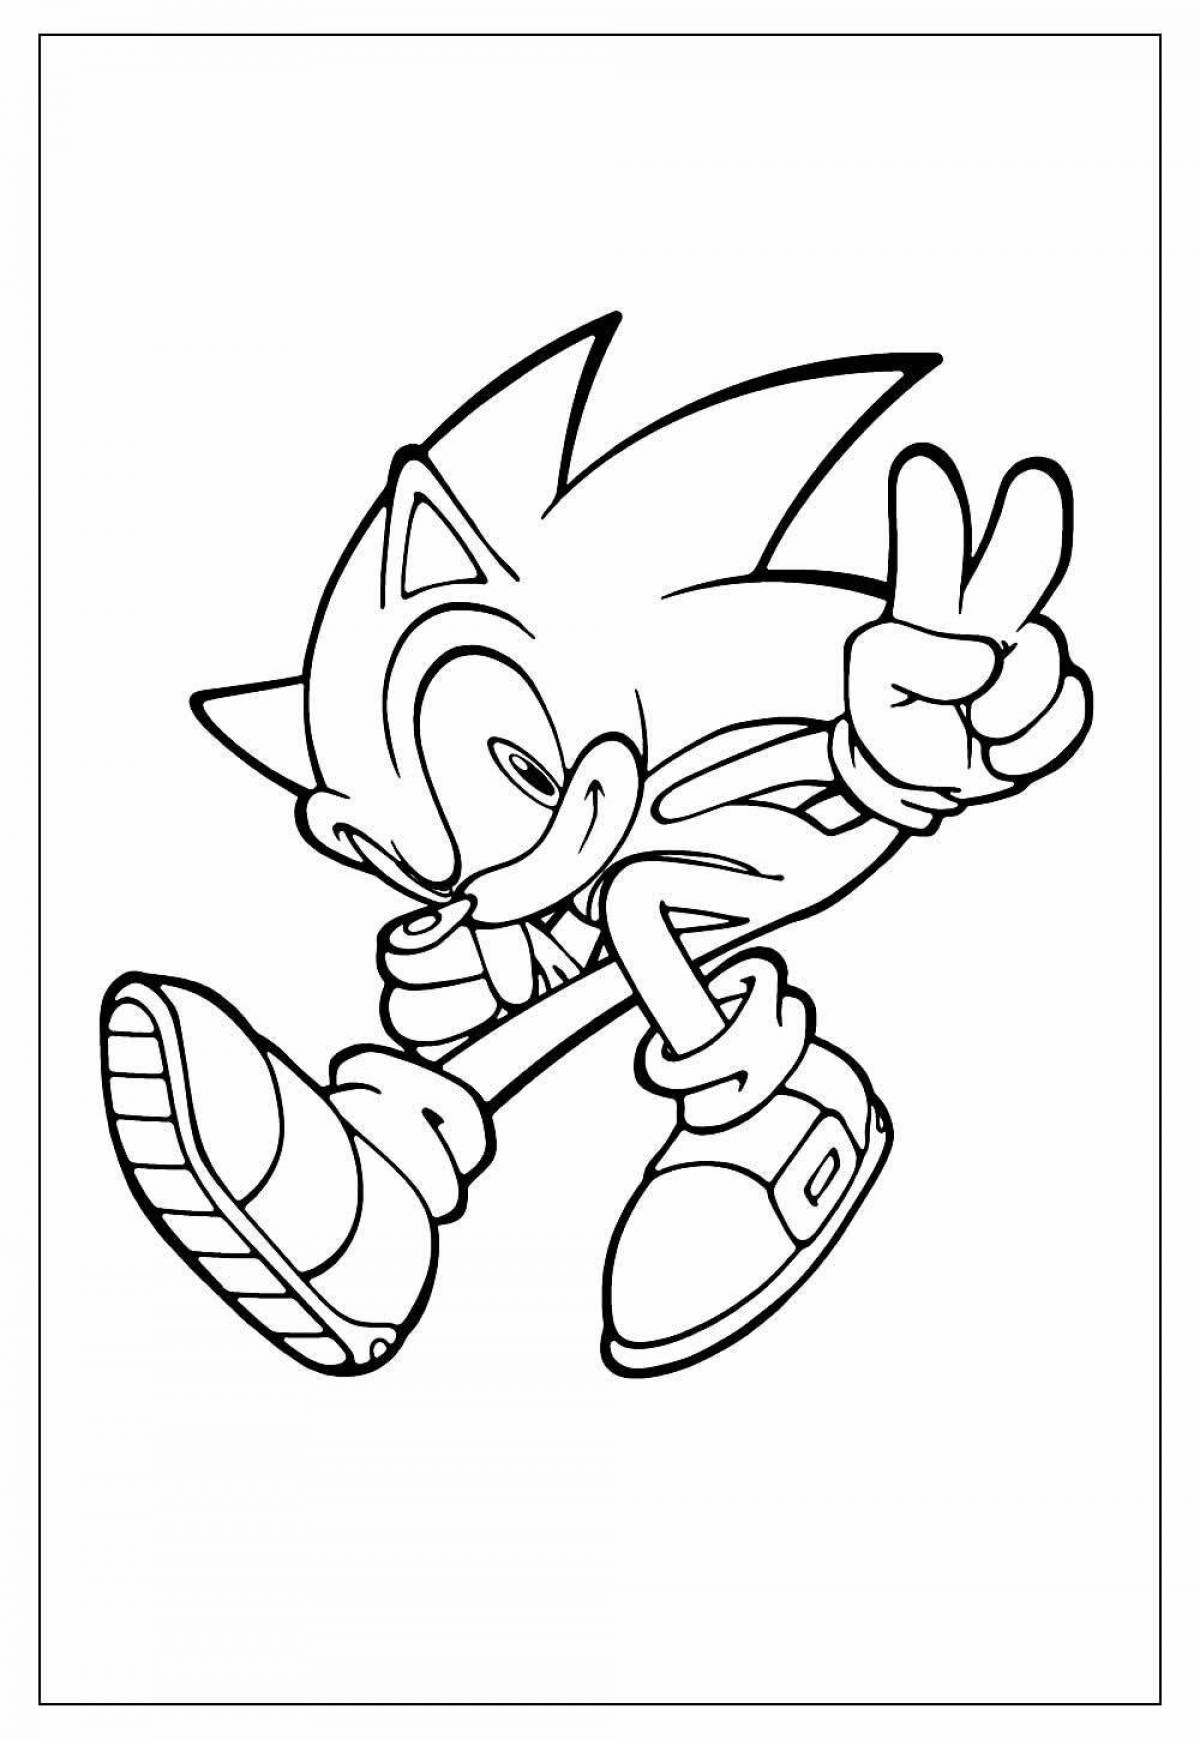 Sonic bright coloring